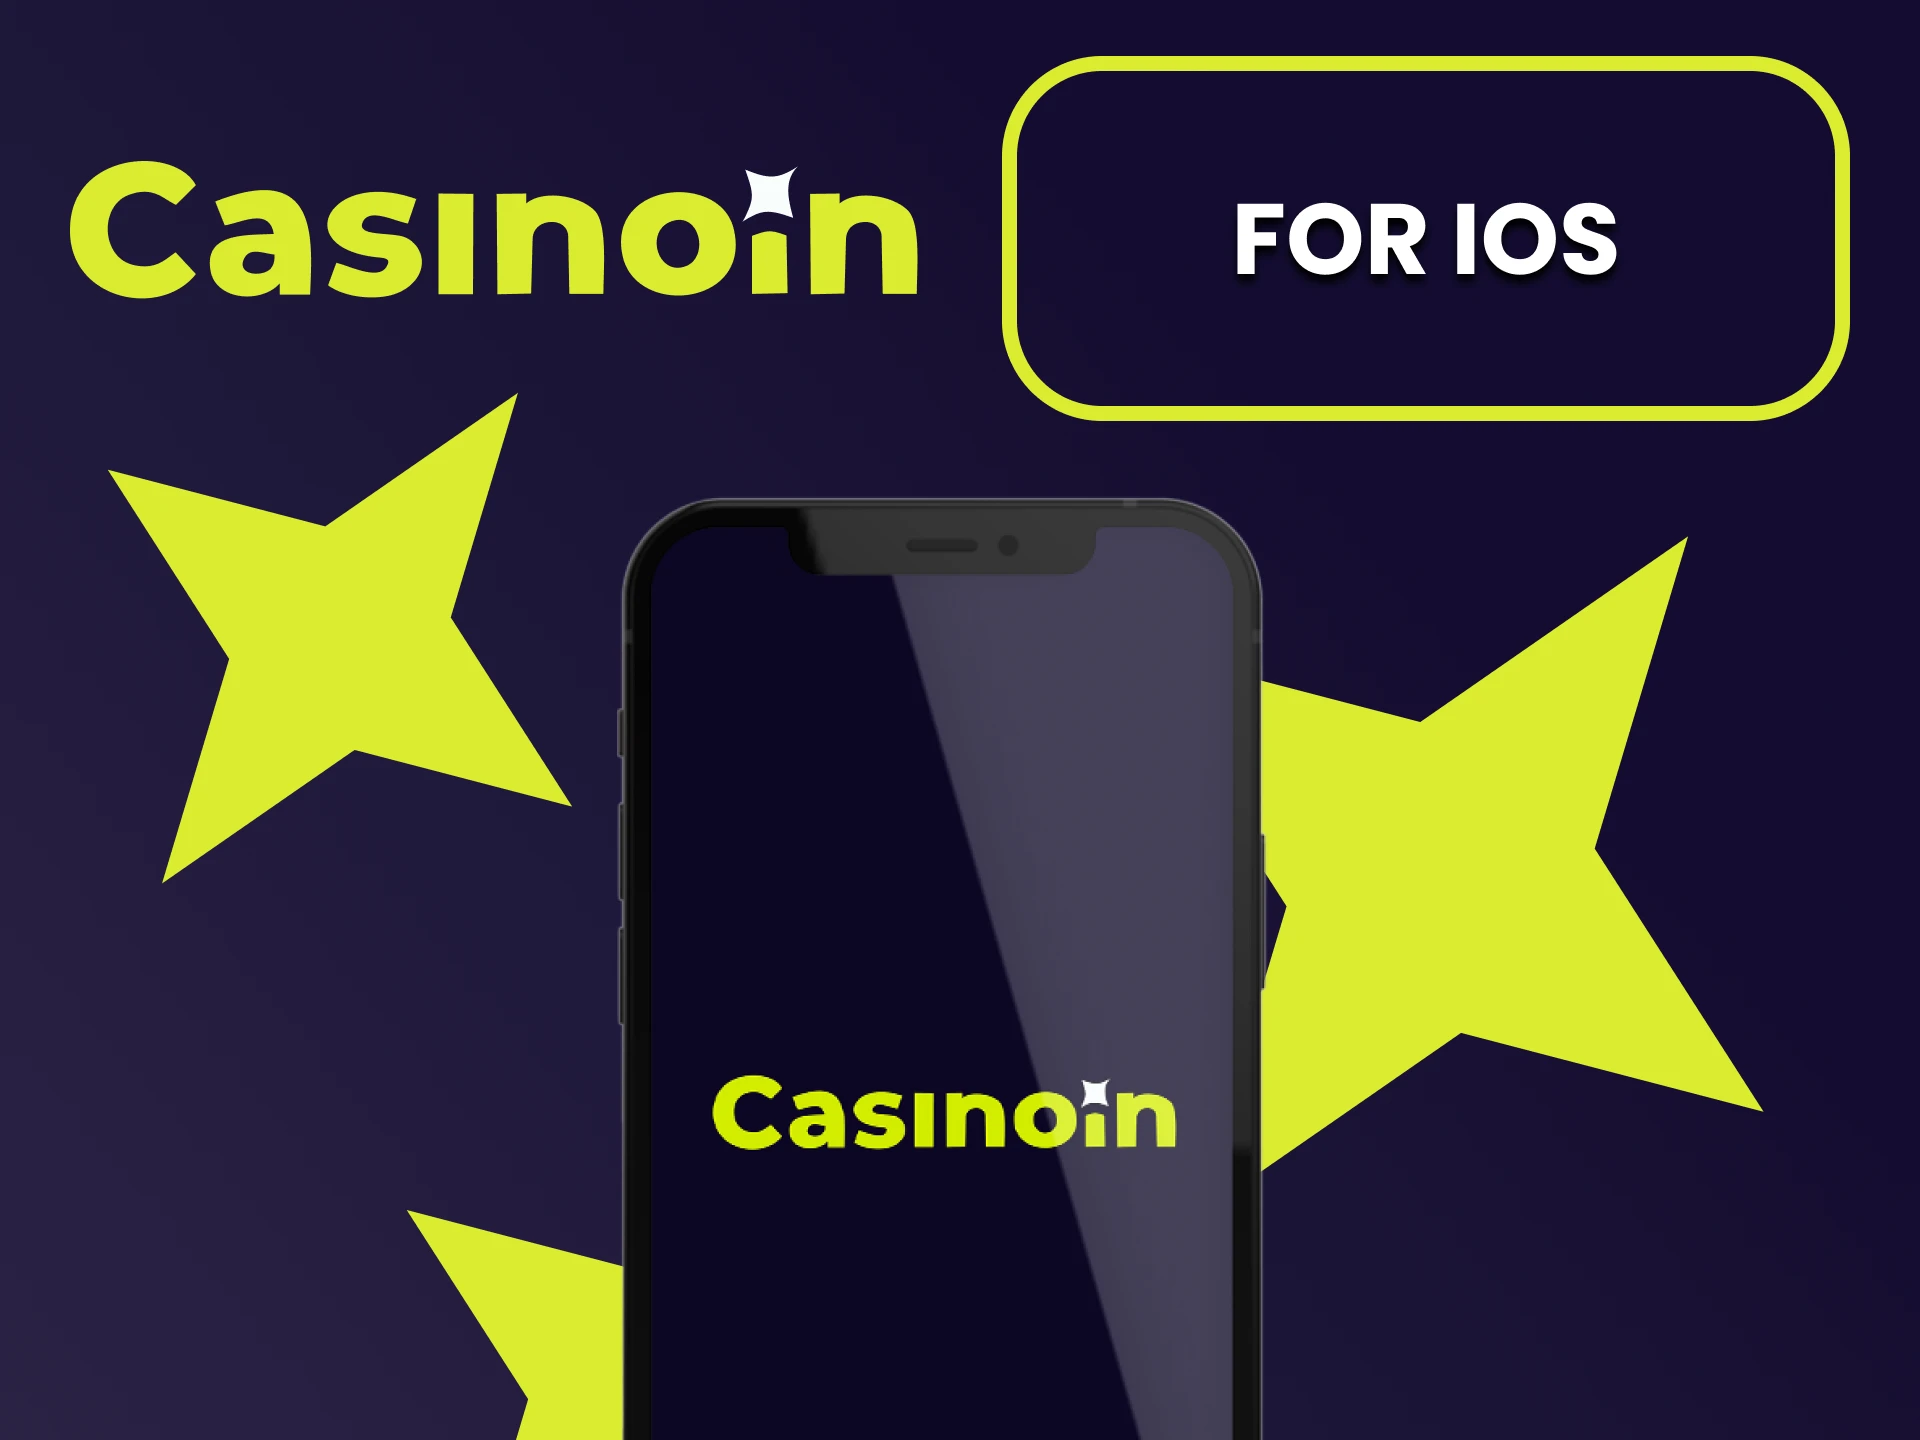 Download the Casinoin app for iOS.